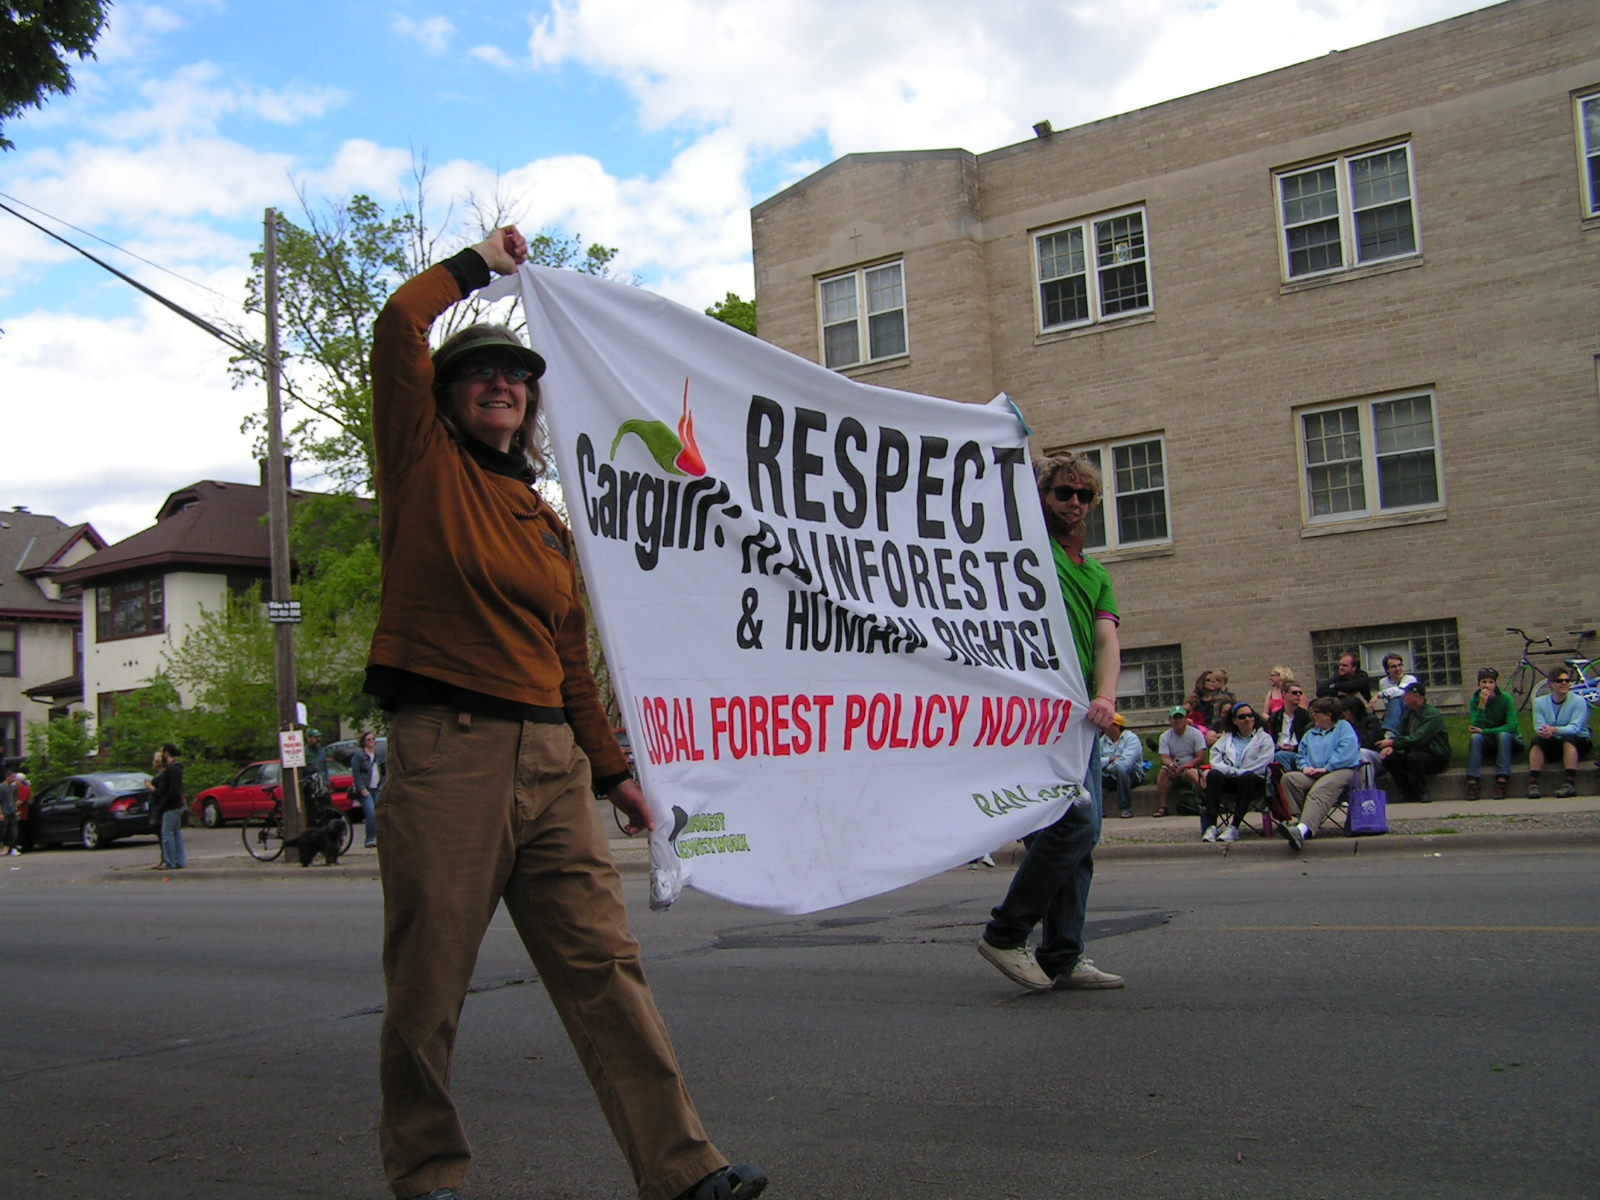 a man holding up a large sign while walking on the street